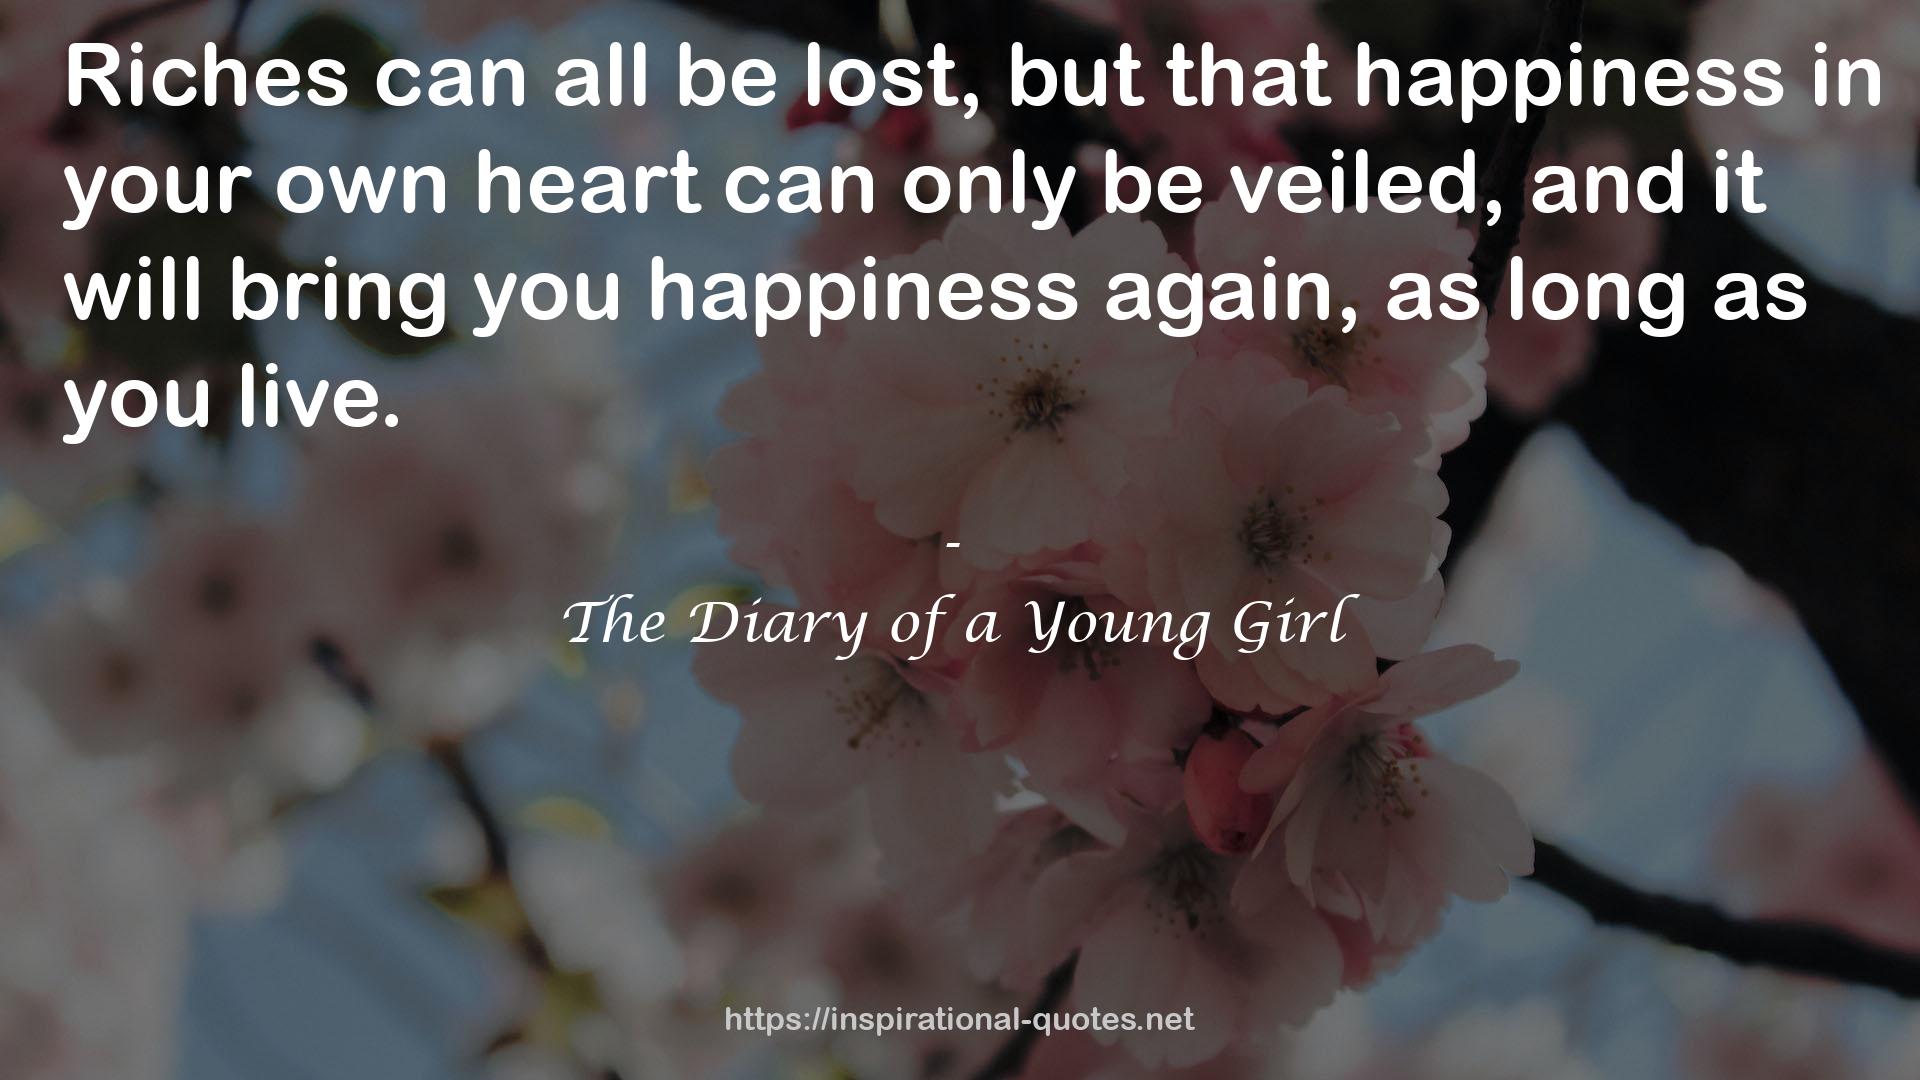 The Diary of a Young Girl QUOTES